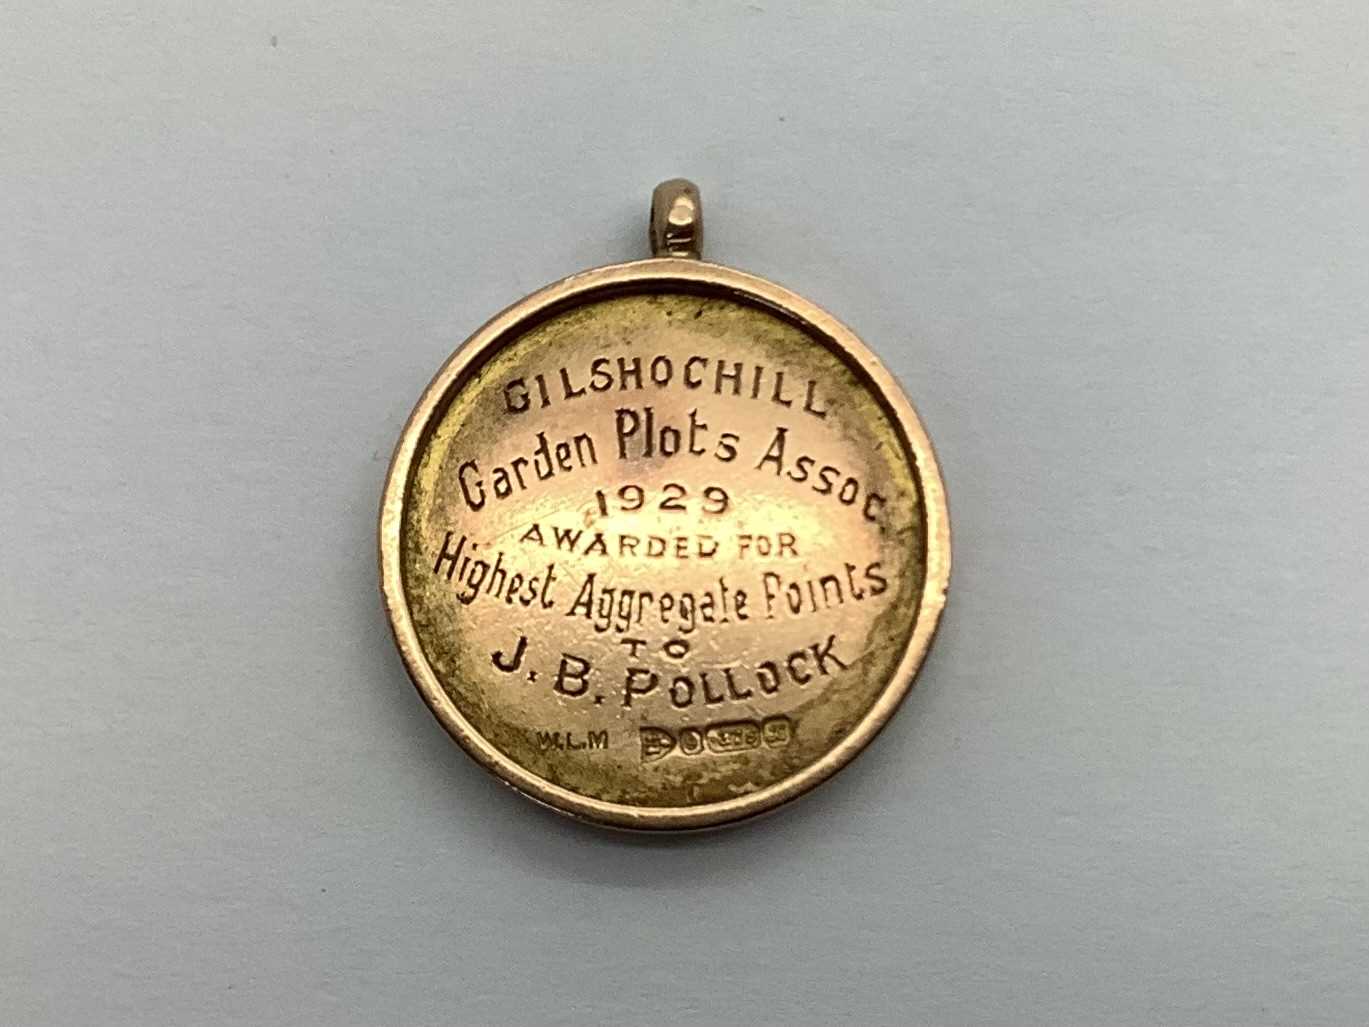 A Chester Hallmarked 9ct Gold Medallion Pendant, initialled and engraved "Gilshochill Garden Plots - Image 4 of 4